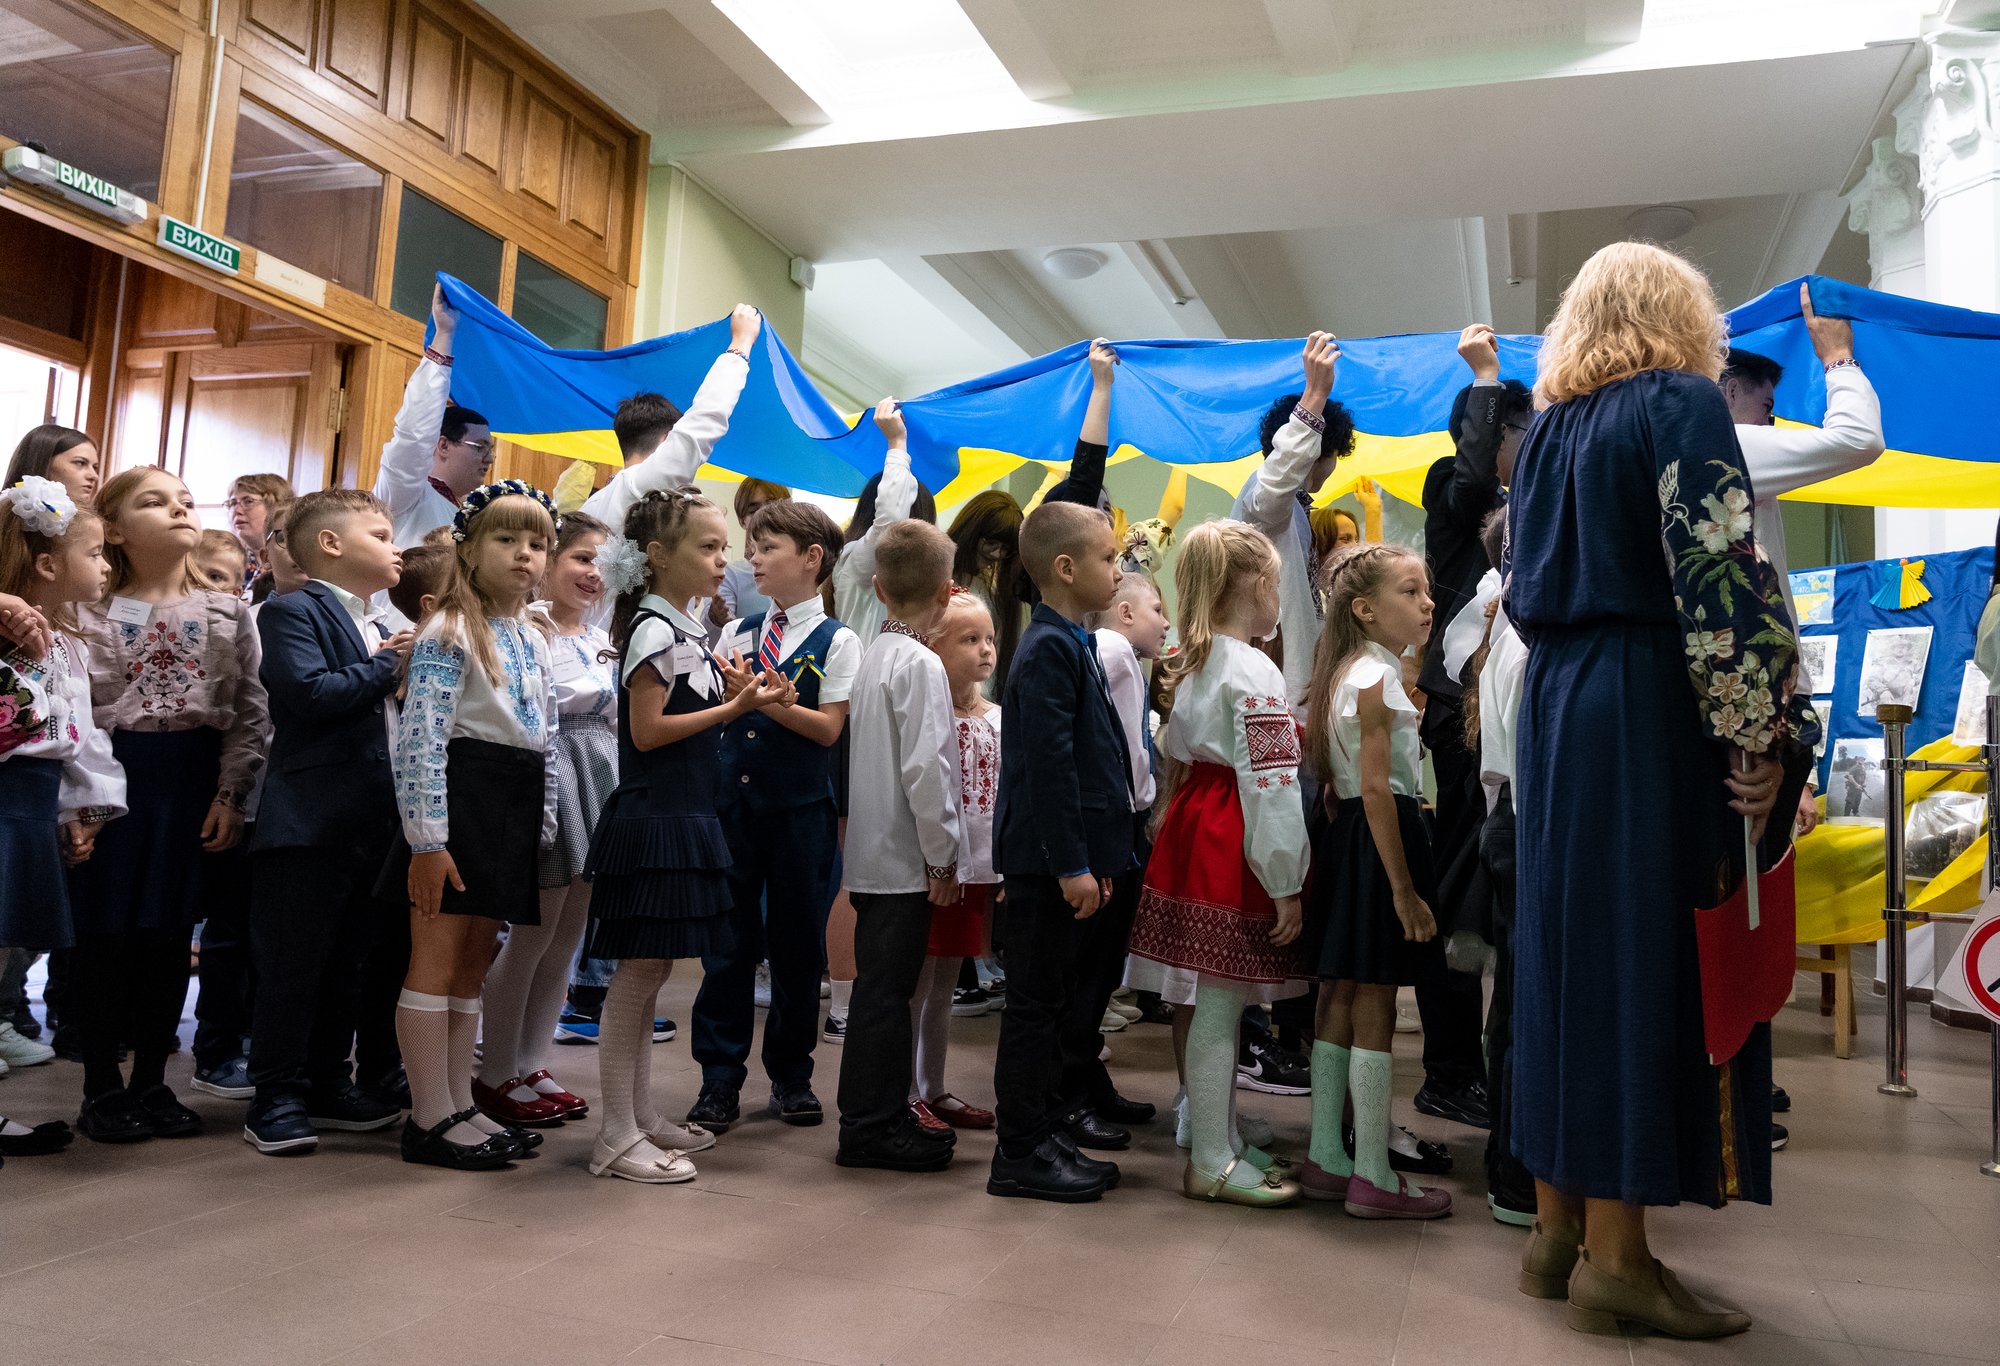 Ukrainian students in Kyiv attend their first day of school on Sept. 1, 2022. Photo by Nolan Peterson/Coffee or Die.